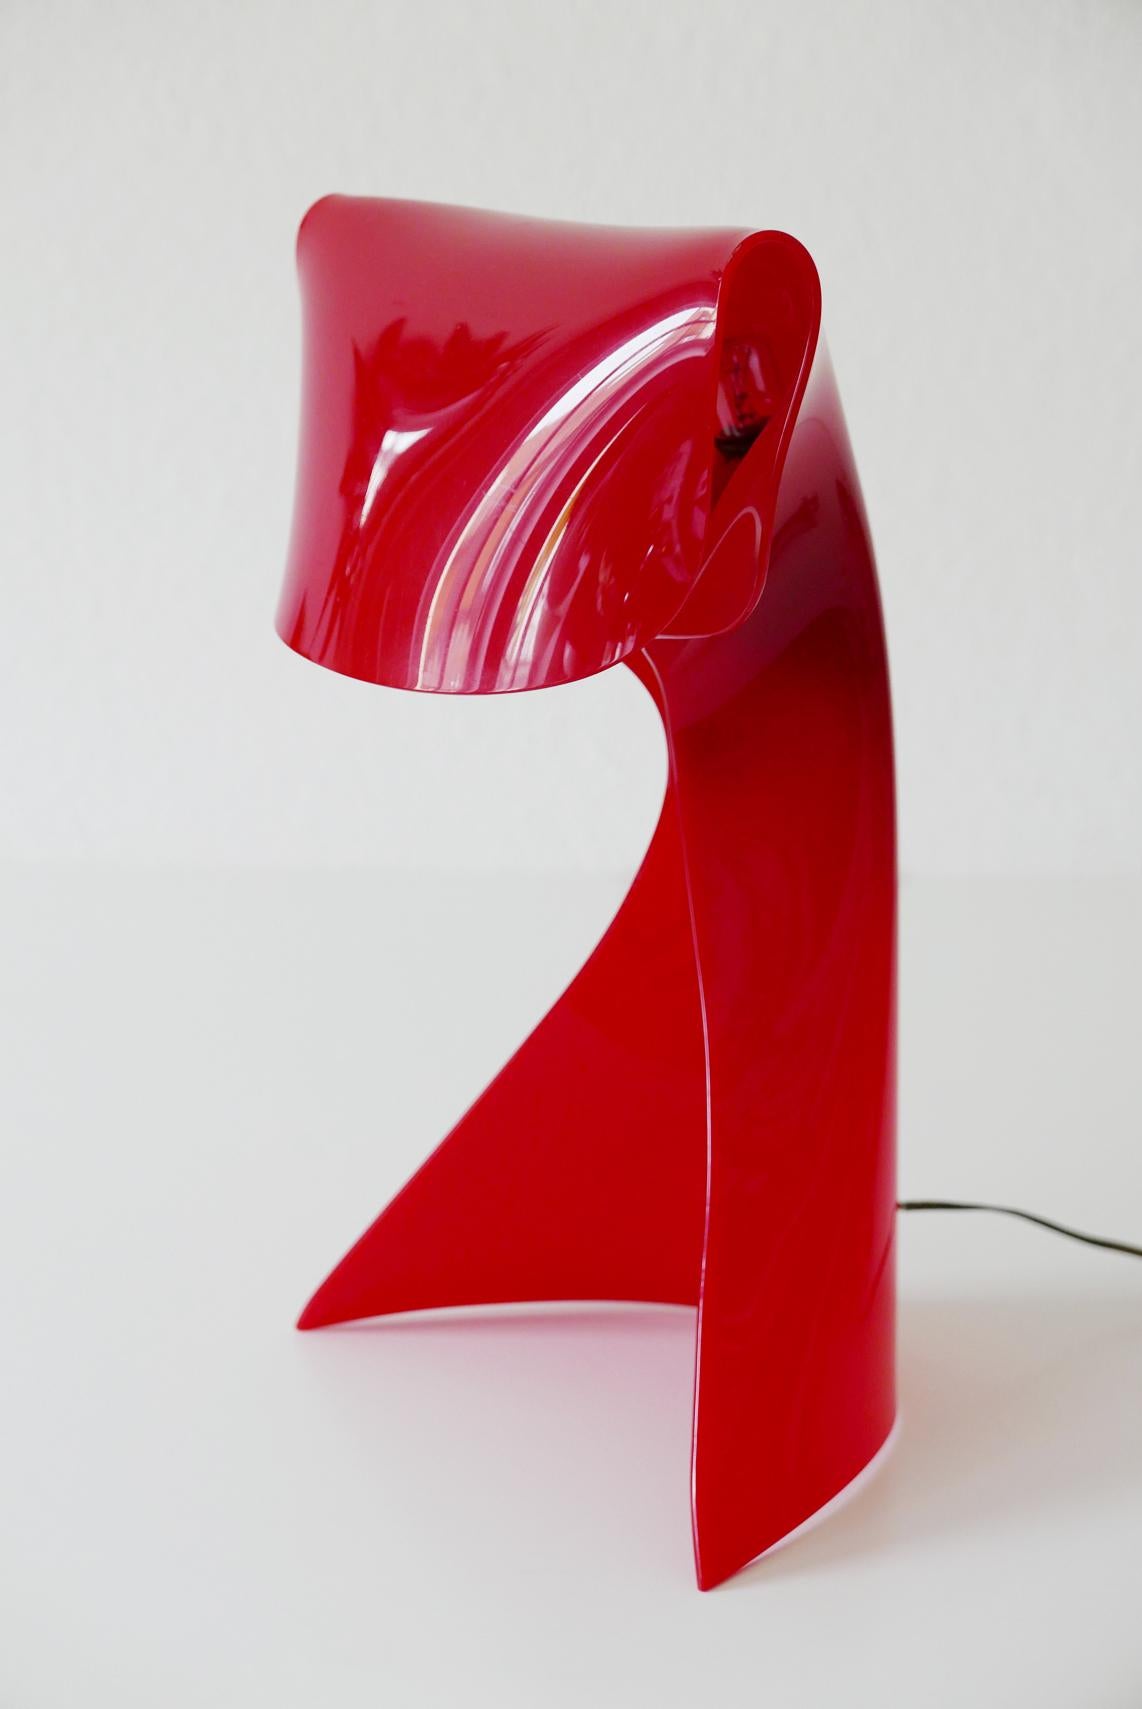 Mid-Century Modern Exceptional Table Lamp by Hanns Hoffmann-Lederer for Heinz Hecht, 1950s, Germany For Sale